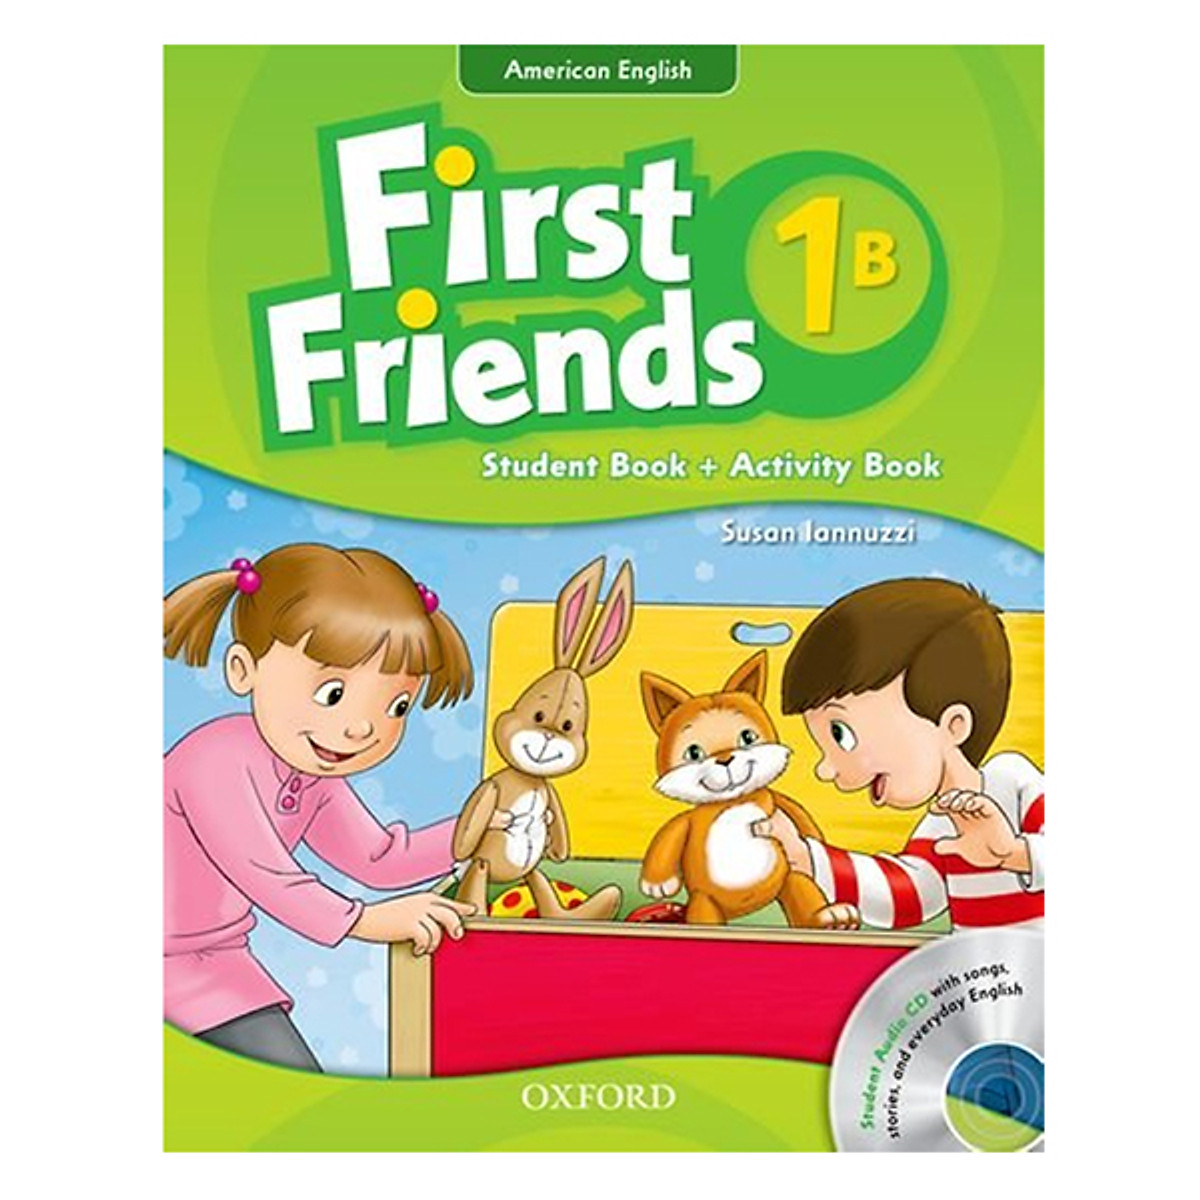 First Friends 1B Student Book + Activity Book (Student Audio CD With Songs, Stories and Everyday English) (American English Edition)